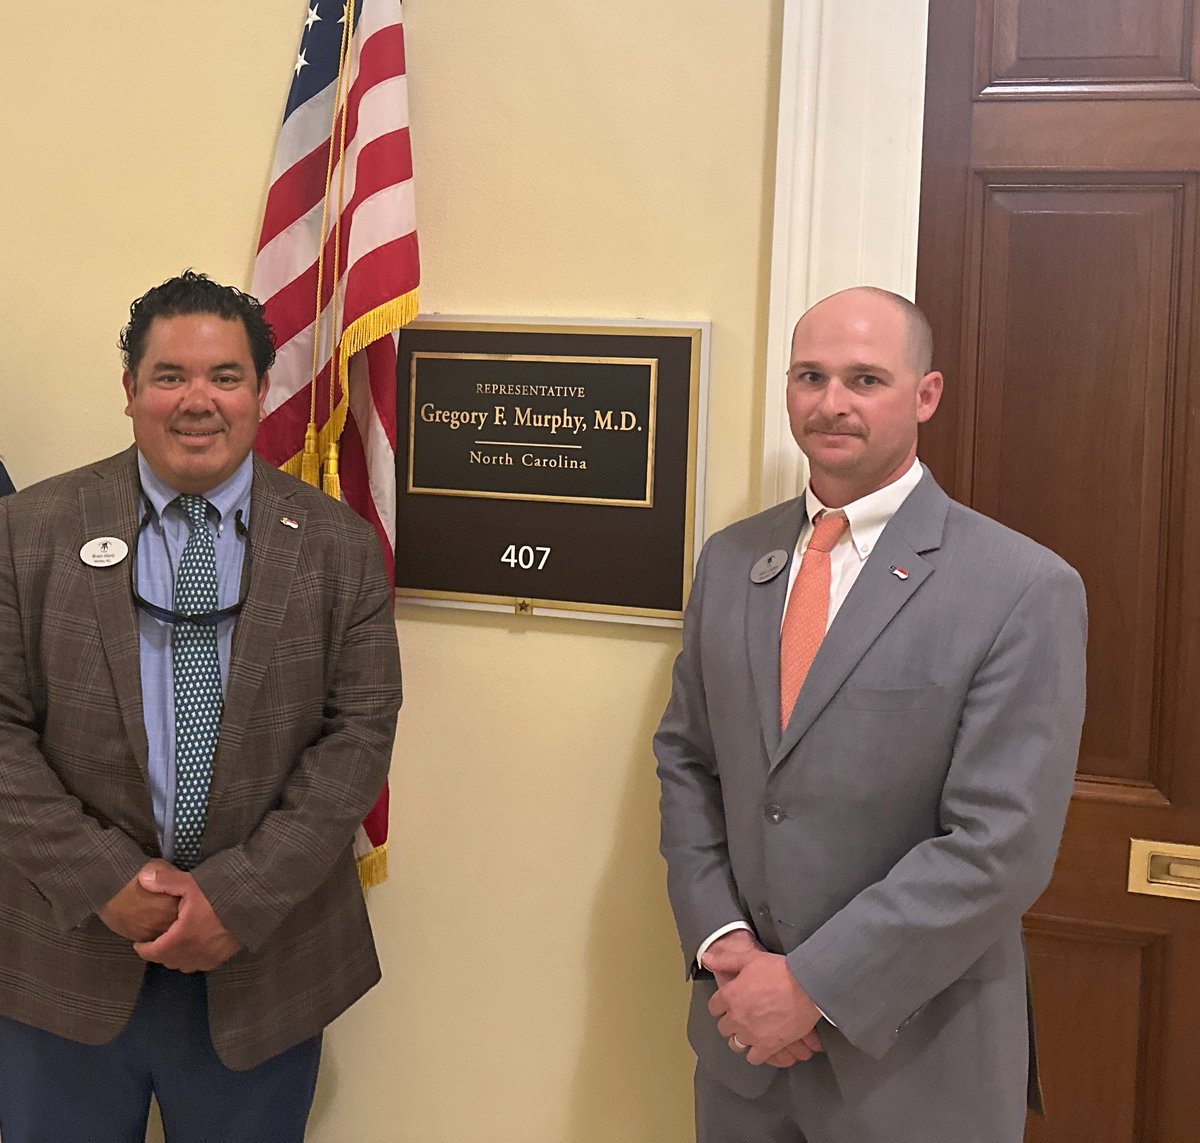 As part of the #Peanut Leadership Academy, growers Drew, Brad, & John traveled to visit with representatives in the U.S. House & Senate to discuss peanut production in the #VirginiaCarolinas & the impact of government programs for producers.

#VirginiaCarolinasPeanutsPromotions